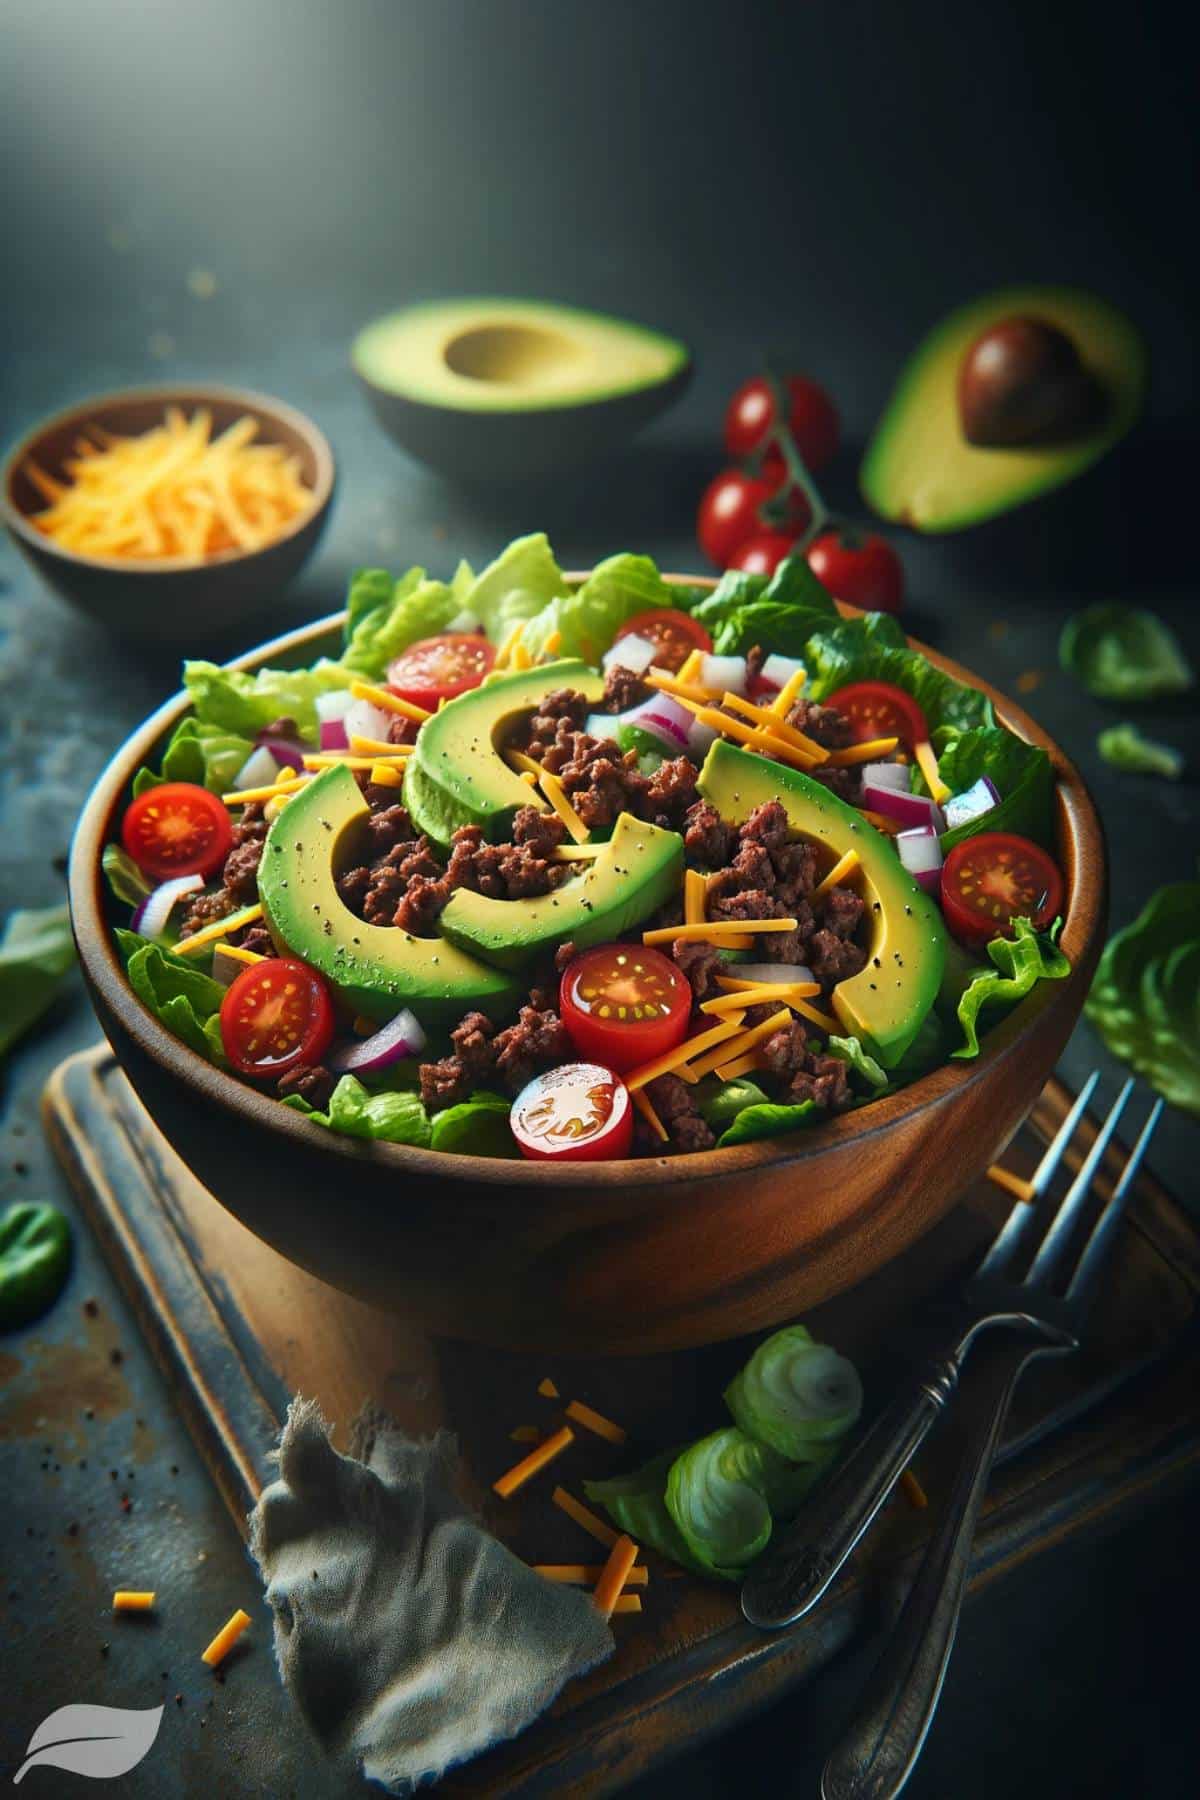 a keto salad. The salad features crisp romaine lettuce, seasoned ground beef, diced avocado, shredded cheddar cheese, juicy cherry tomatoes, and finely chopped red onions